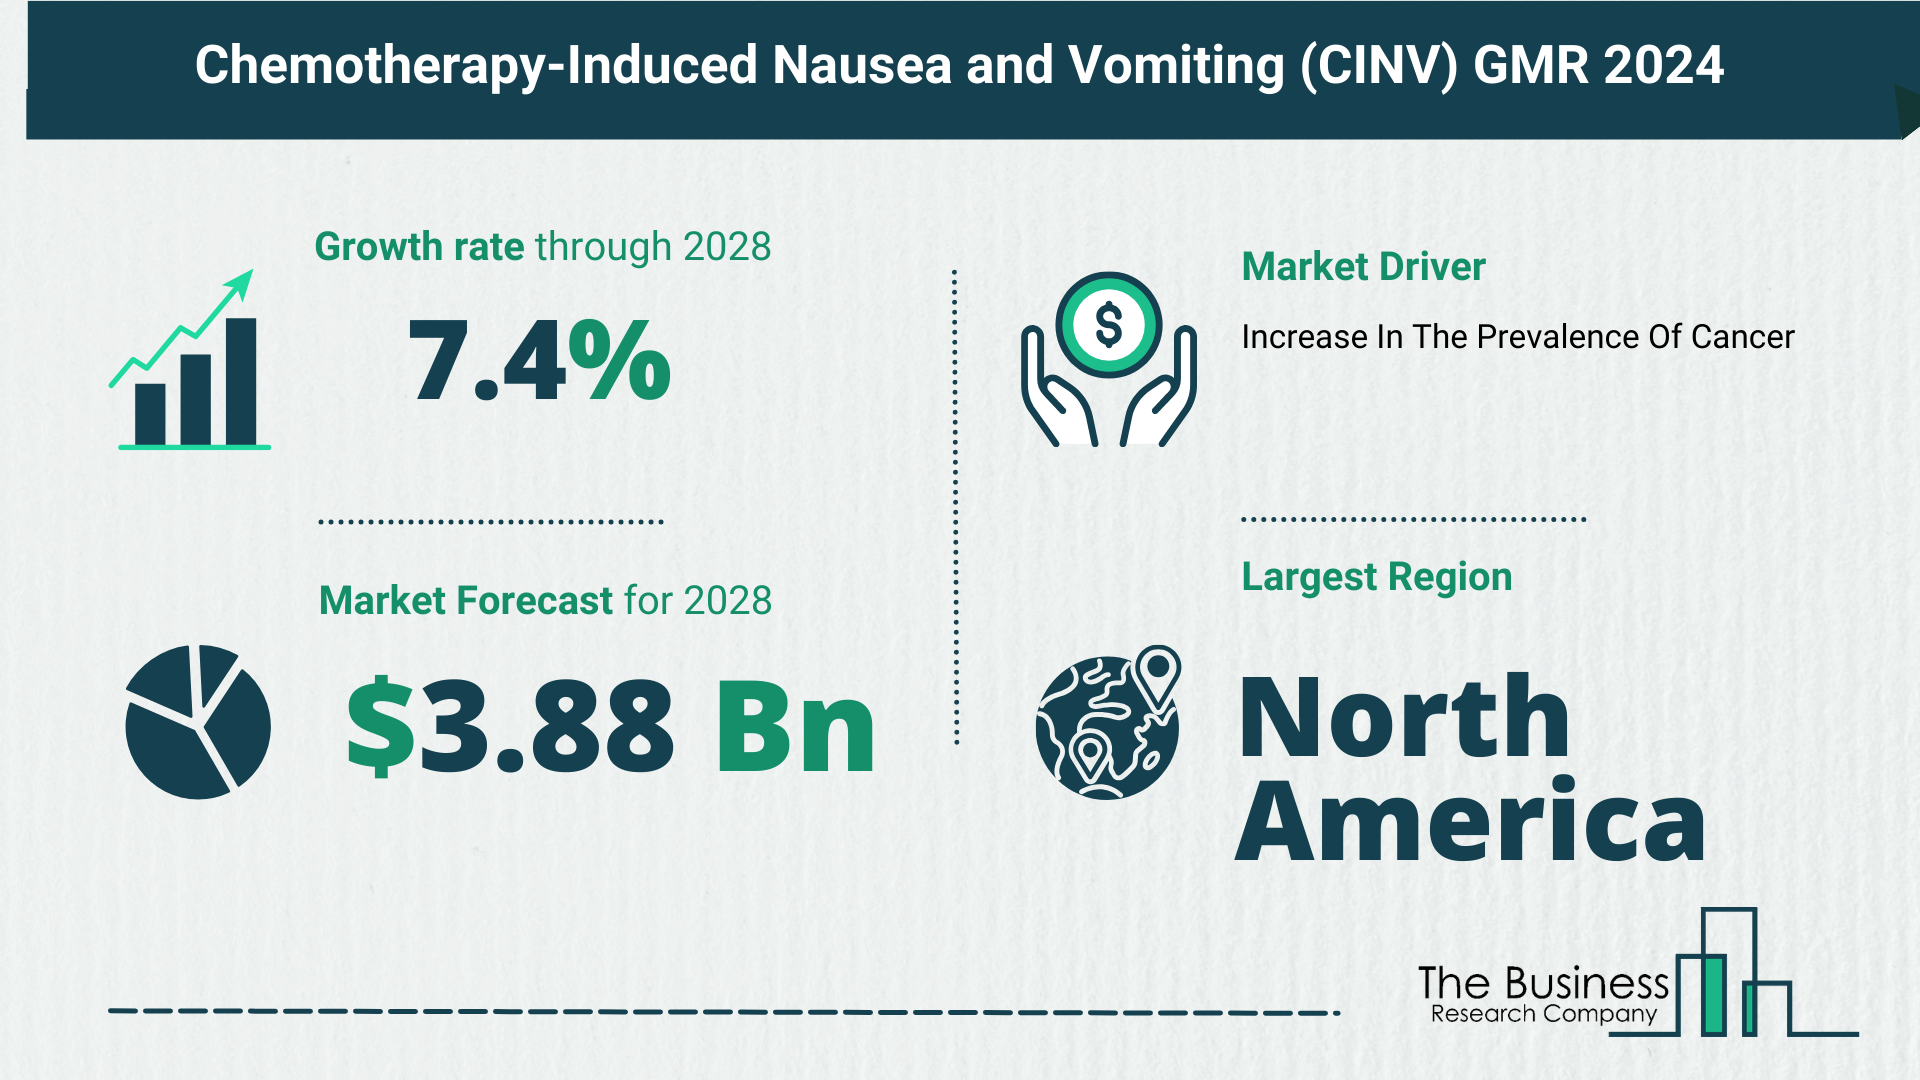 Global Chemotherapy-Induced Nausea and Vomiting (CINV) Market Analysis: Estimated Market Size And Growth Rate